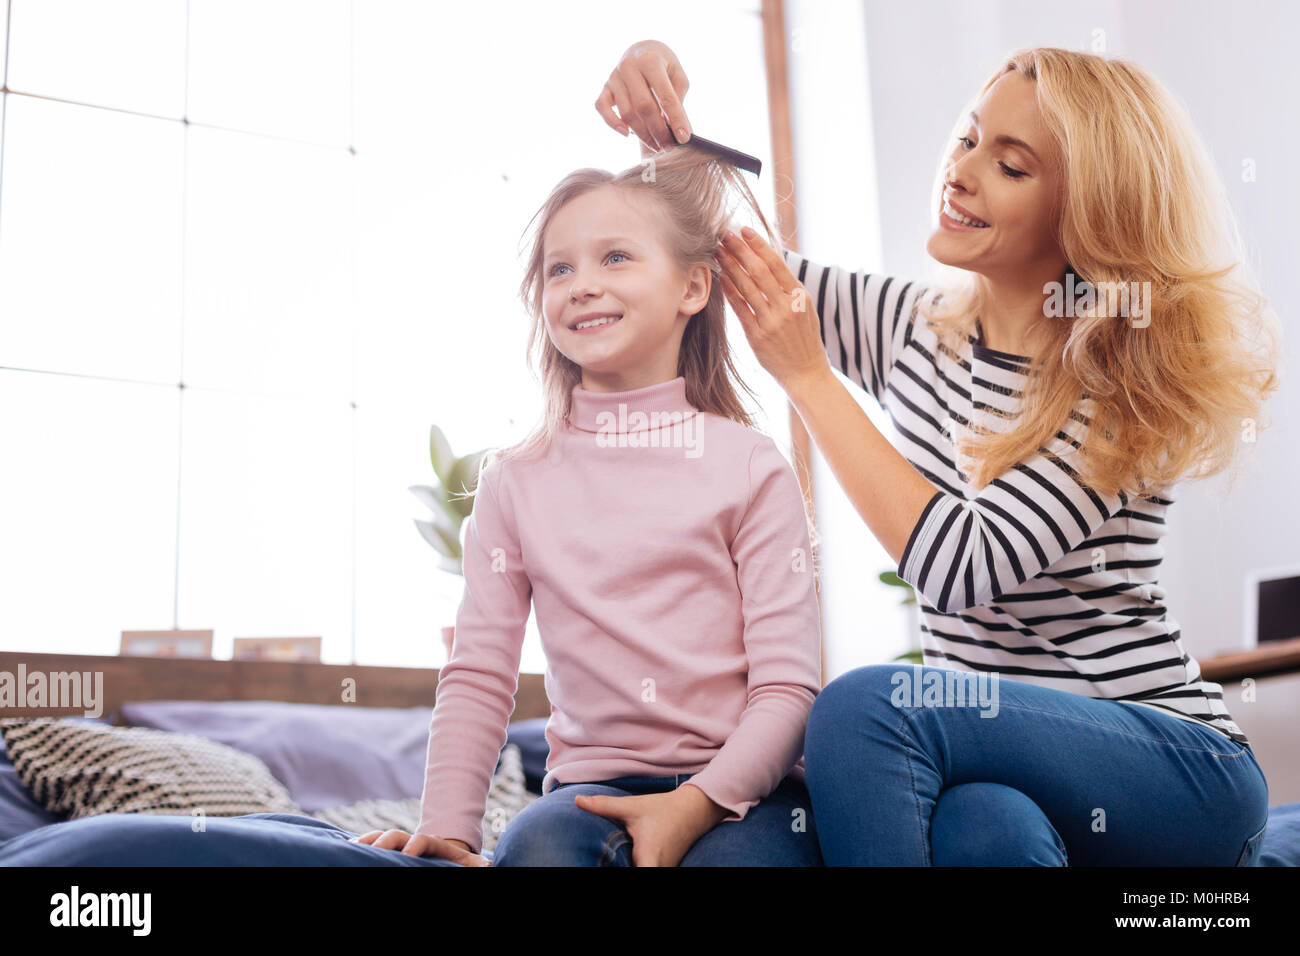 Cheerful mother combing her daughters hair Stock Photo